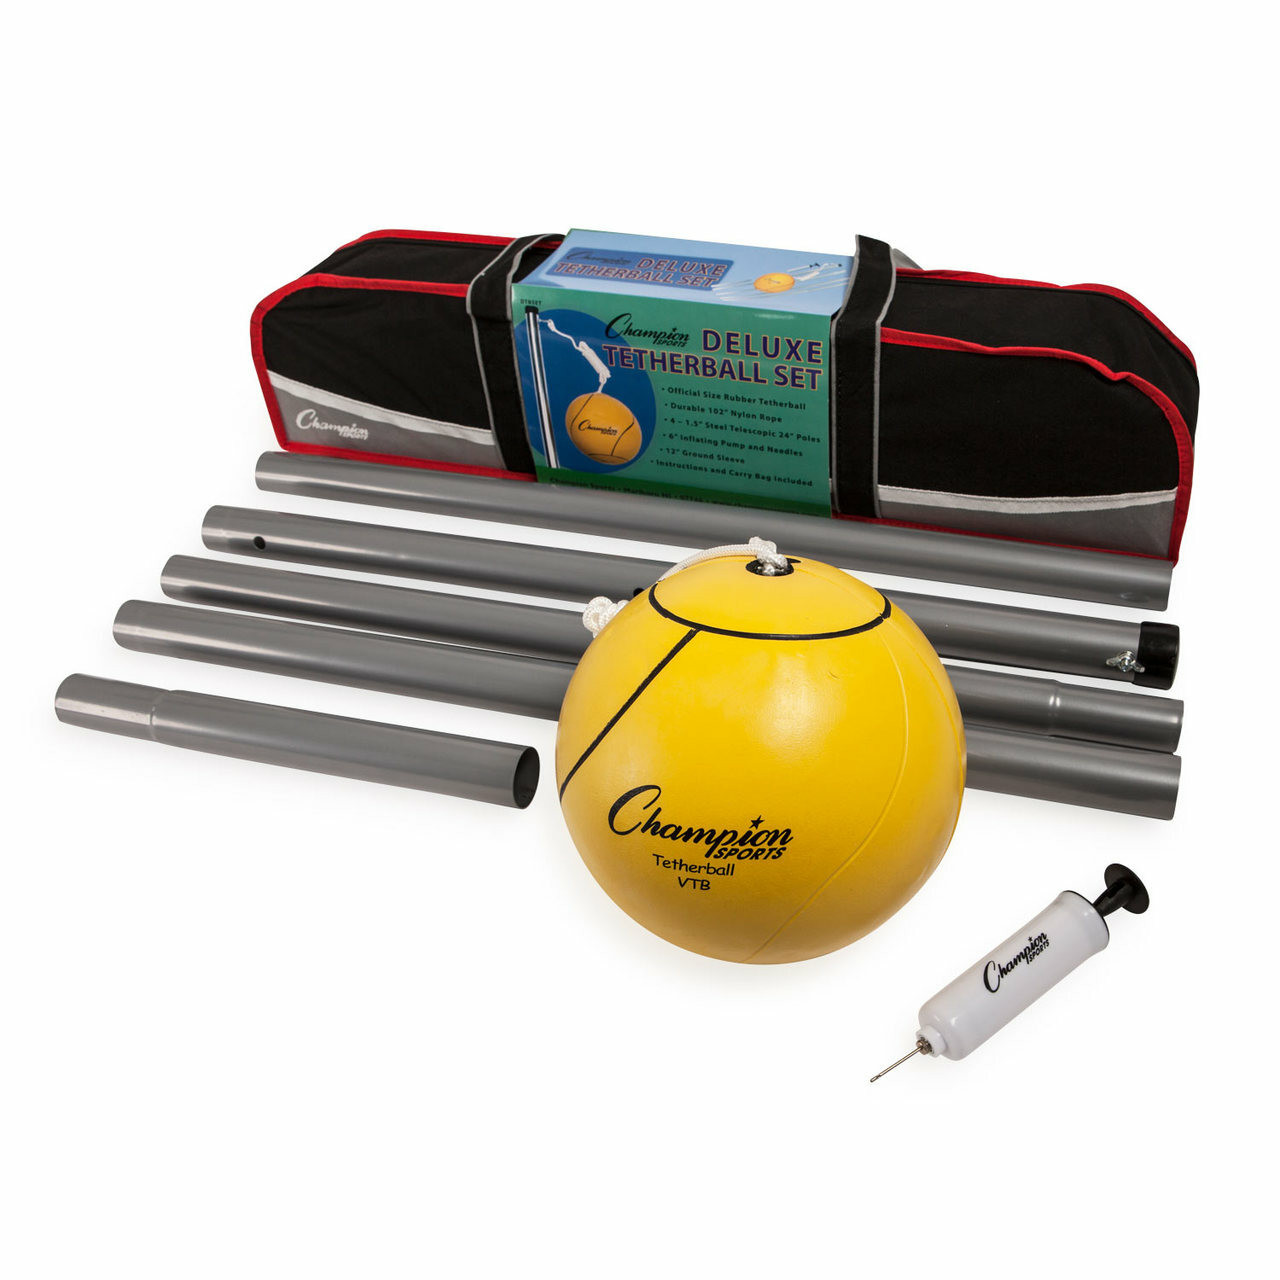 Champion Sports Deluxe Tetherball Set